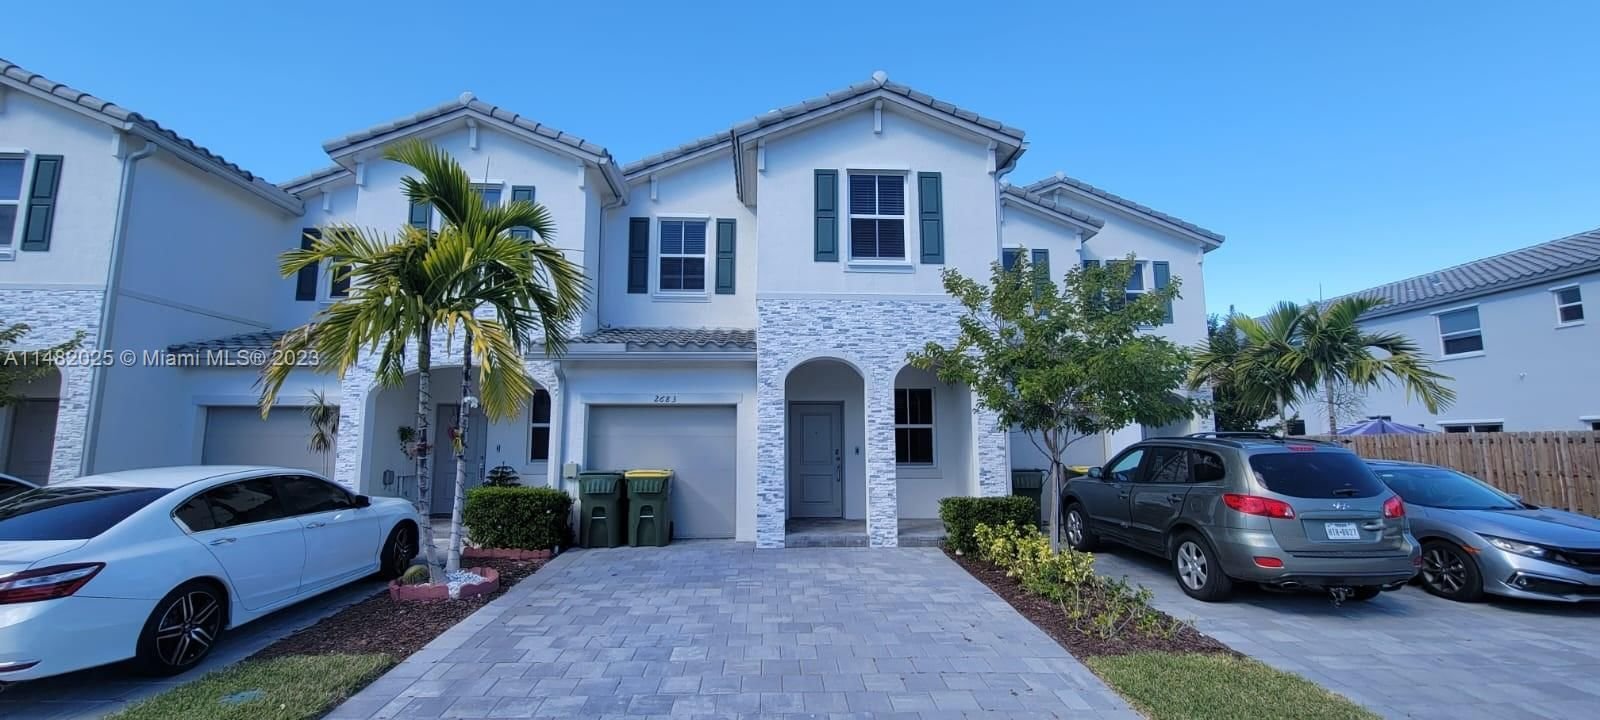 Real estate property located at 2683 12th St, Miami-Dade County, KEYS GATE RESIDENTIAL, Homestead, FL